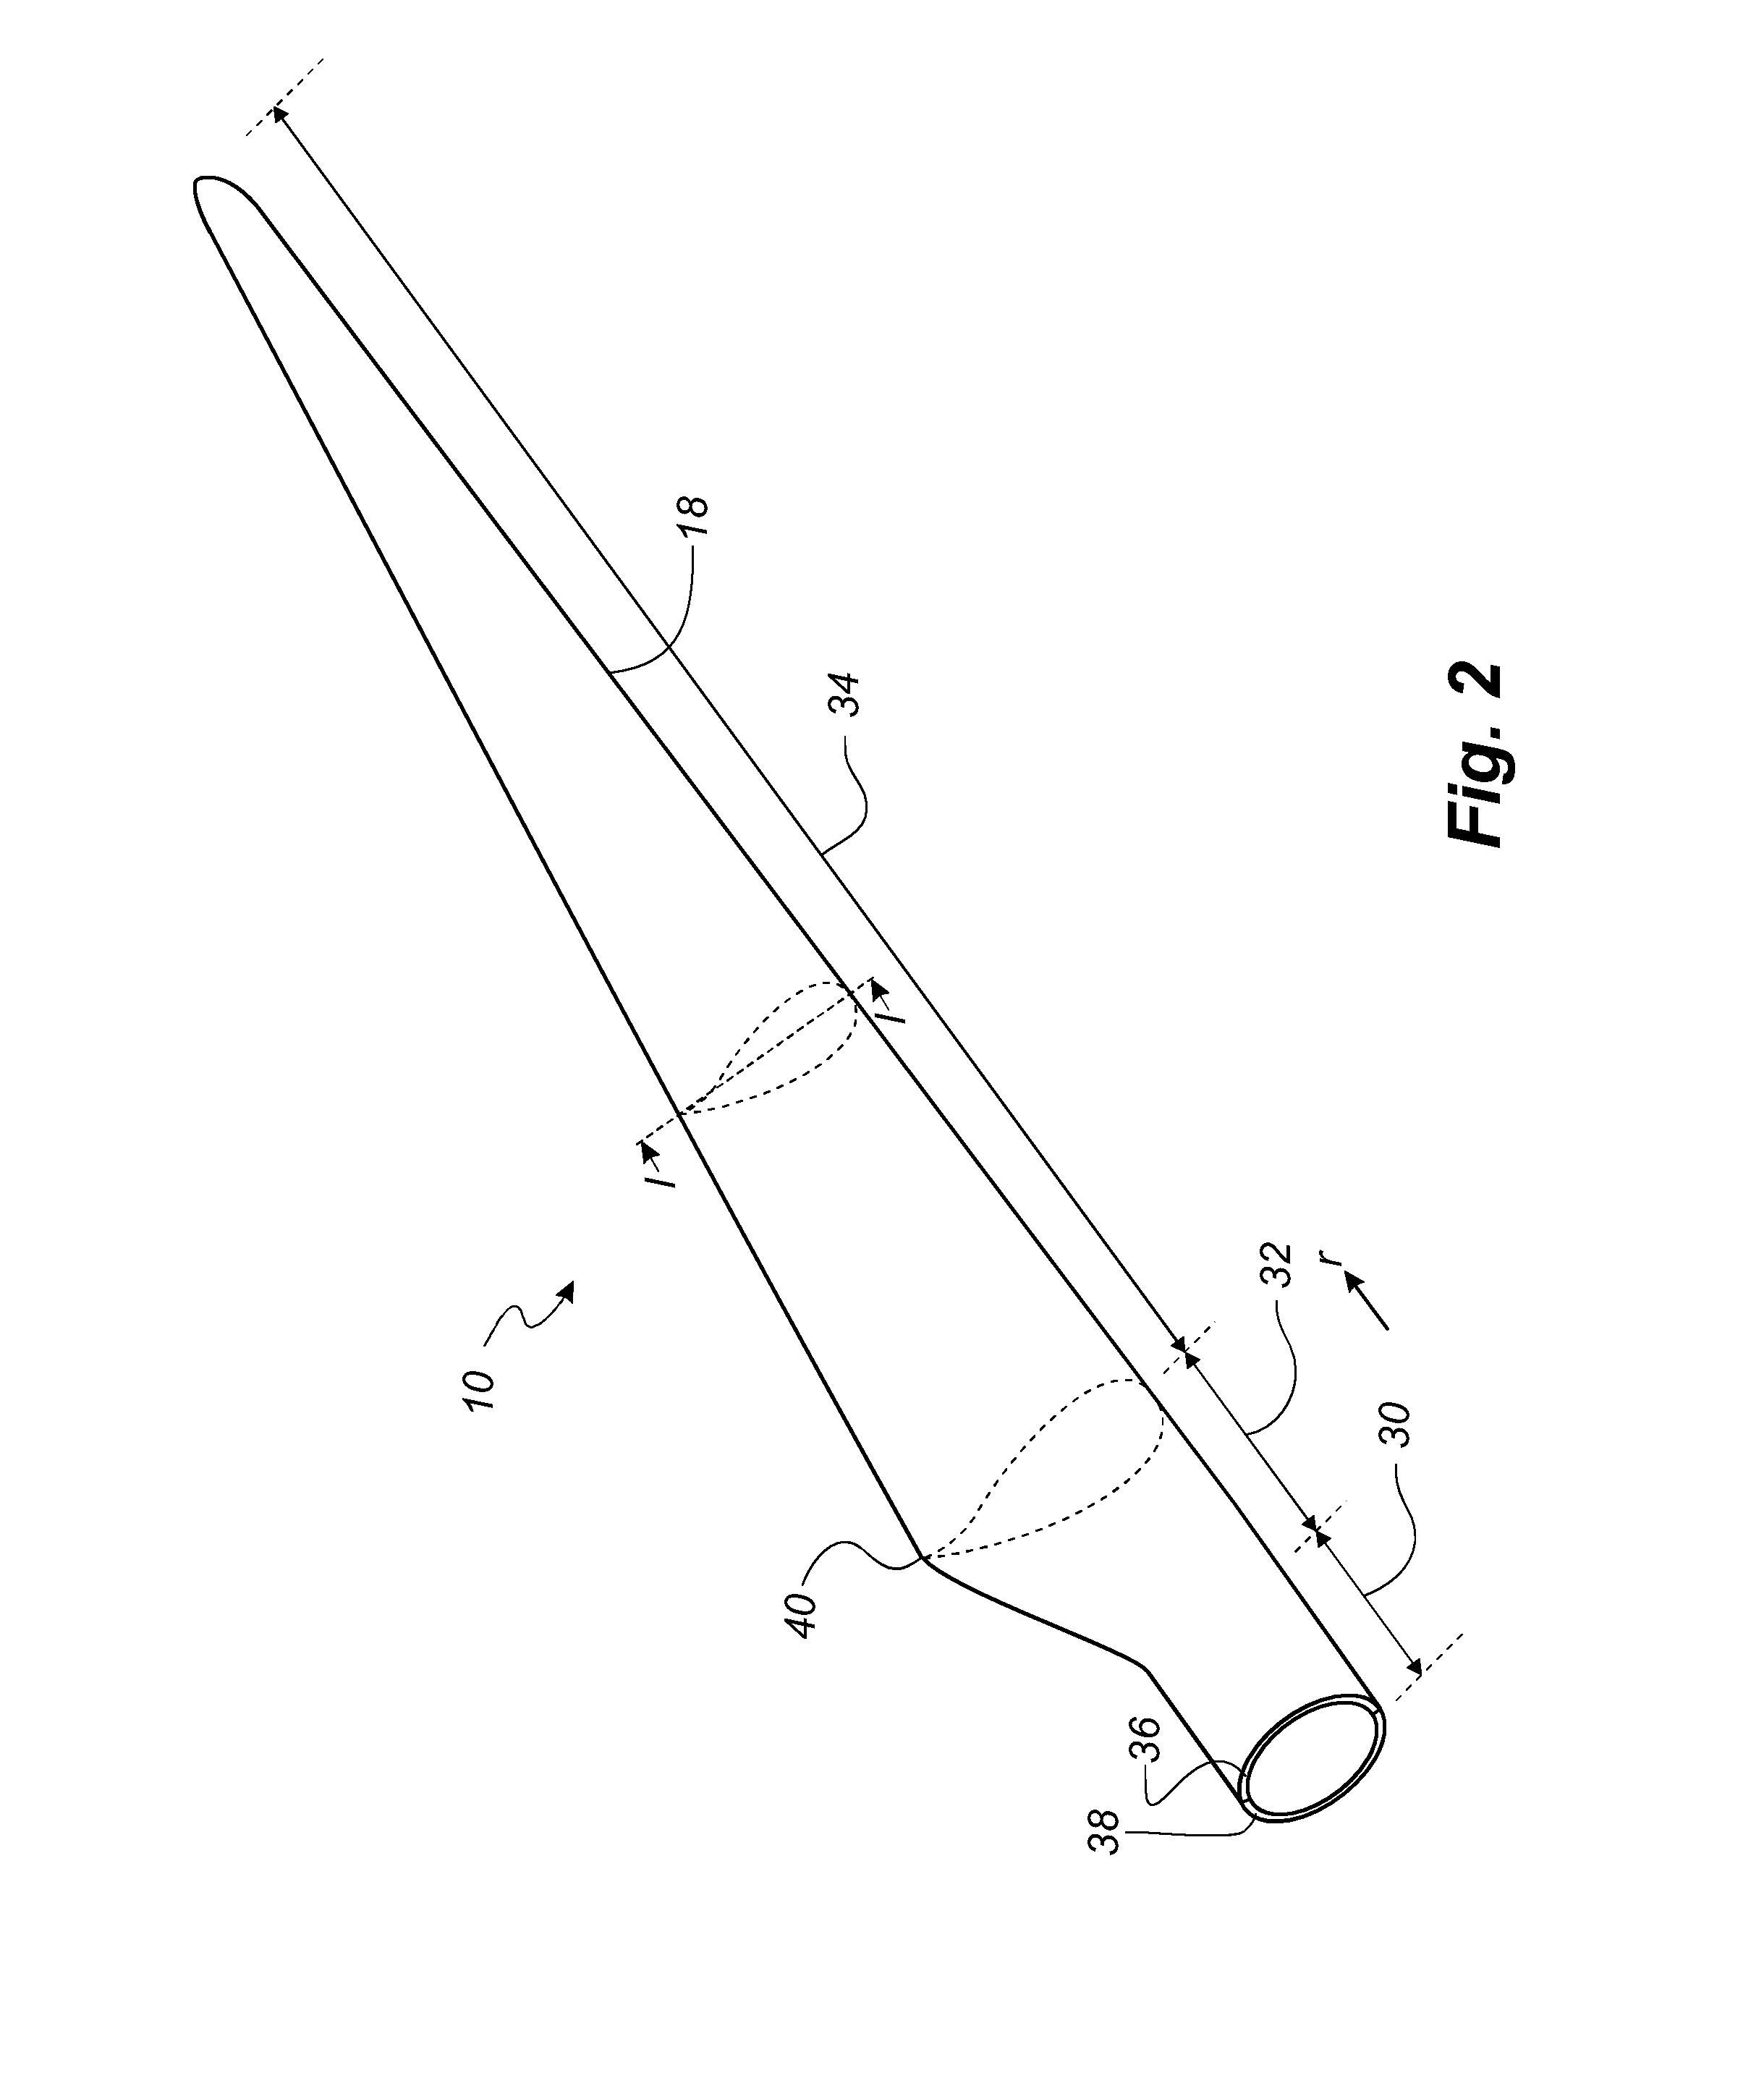 A method of manufacturing a shear web using a pre-formed web foot flange